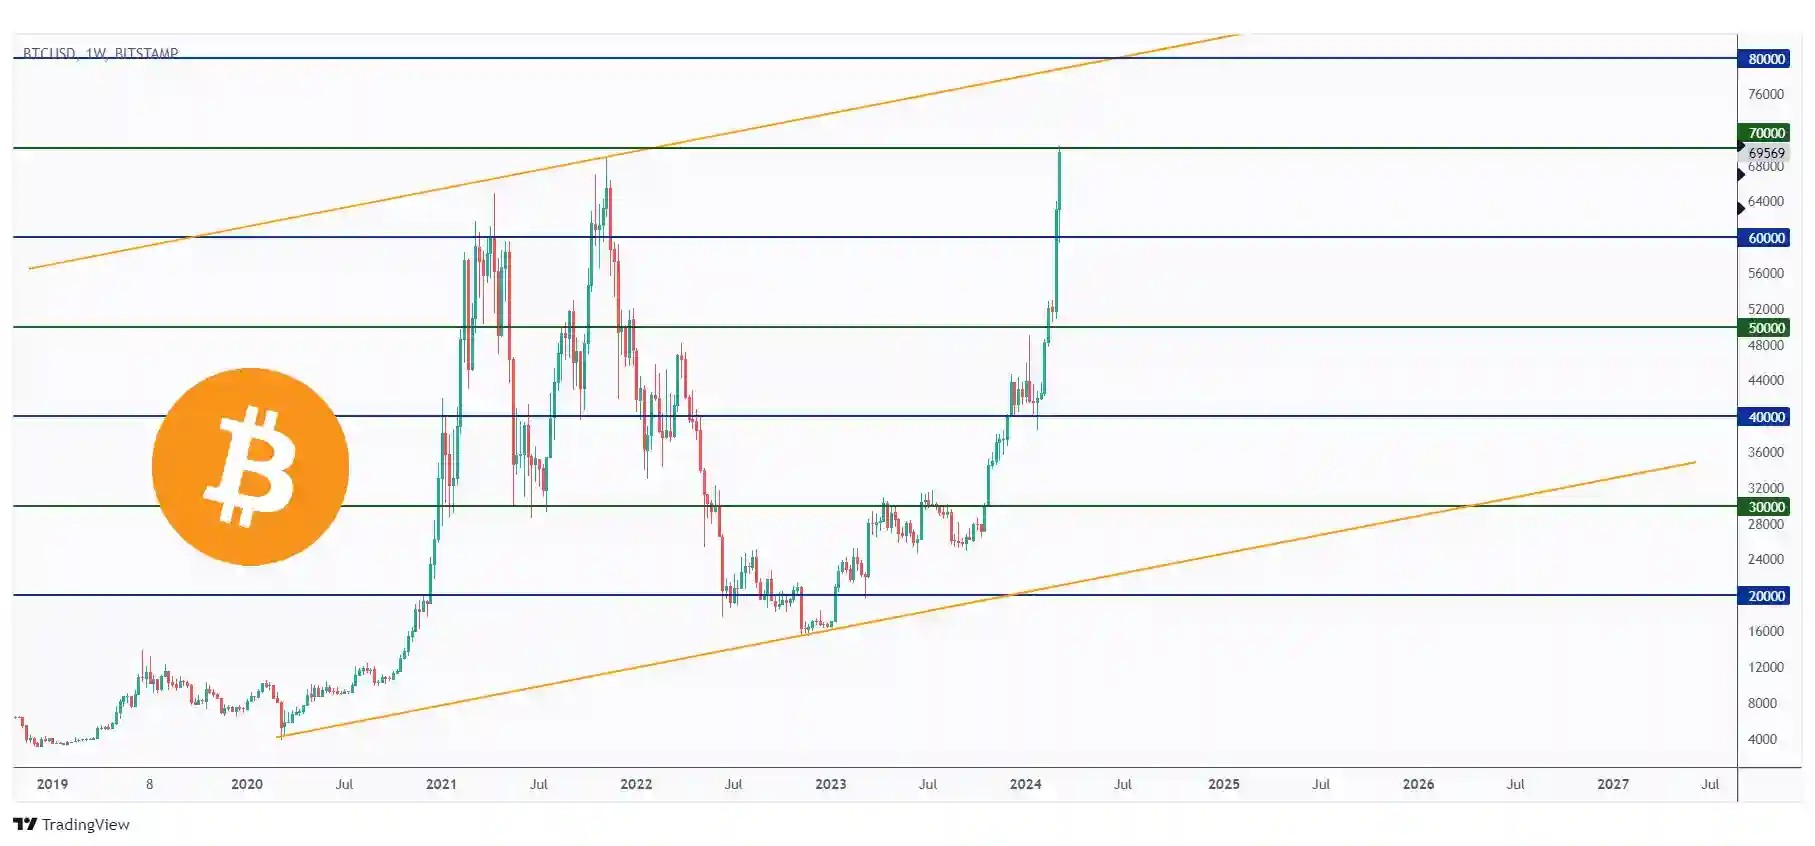 BTC weekly chart recording a new all-time high at $70,000.